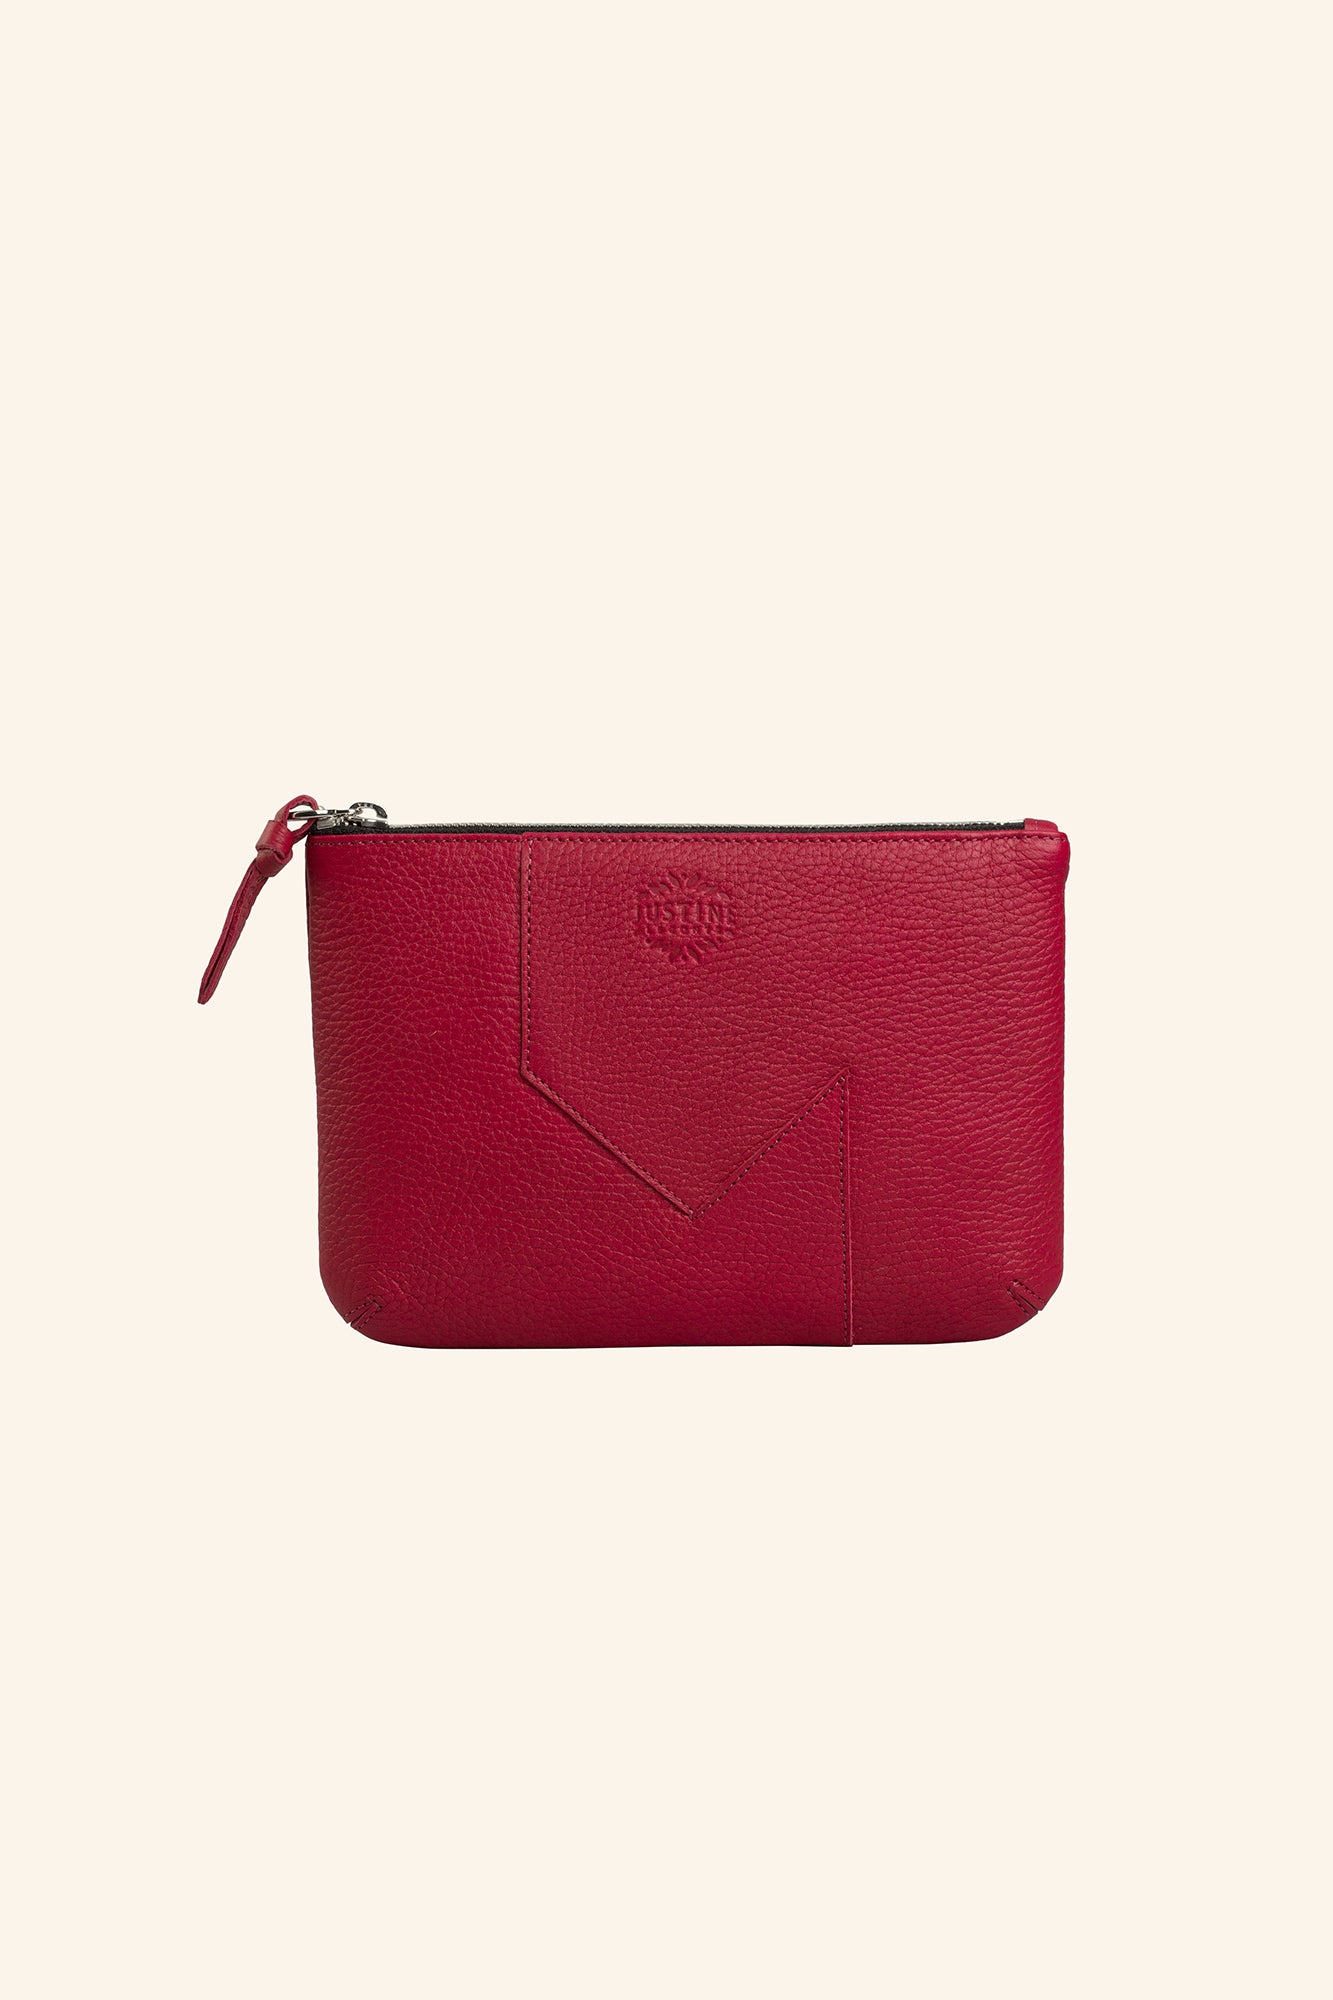 JL pouch leather - Berry red